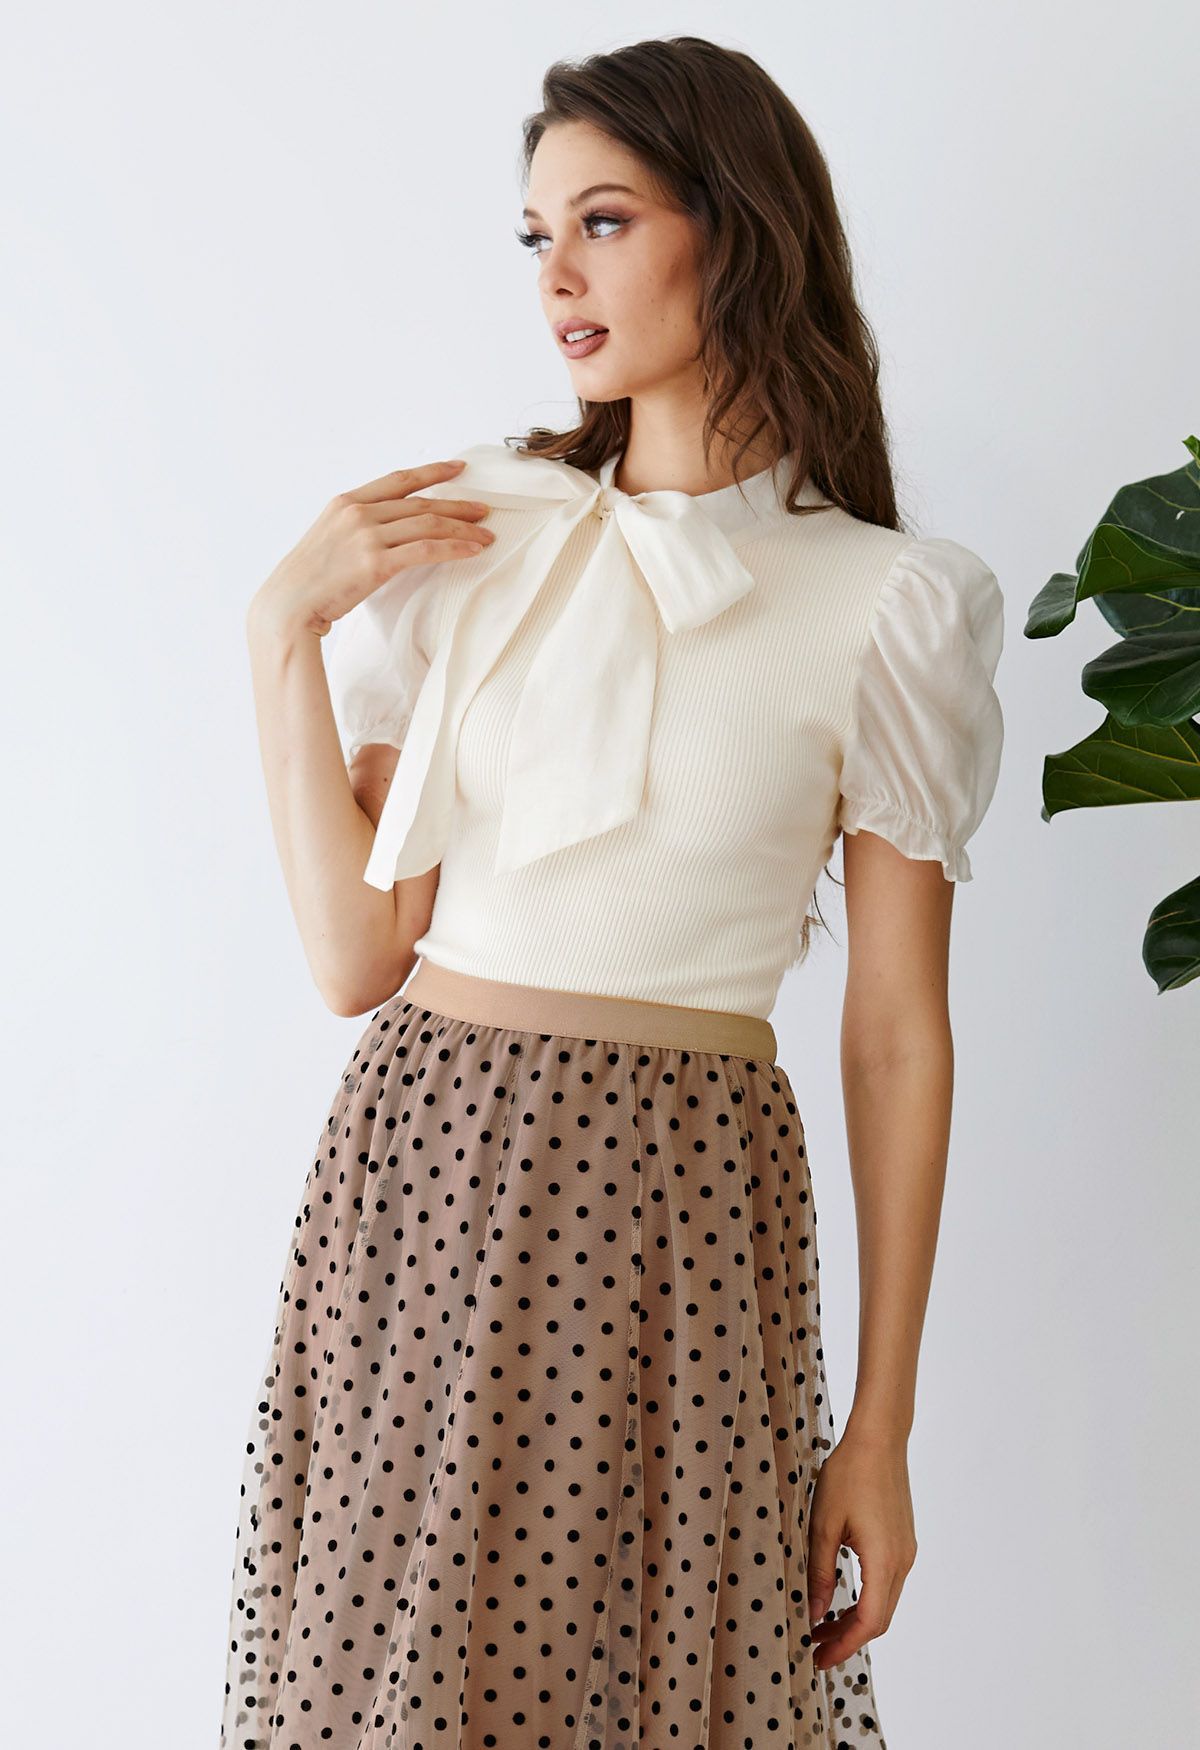 Short Sleeve Detachable Bowknot Spliced Knit Top in Cream | Chicwish